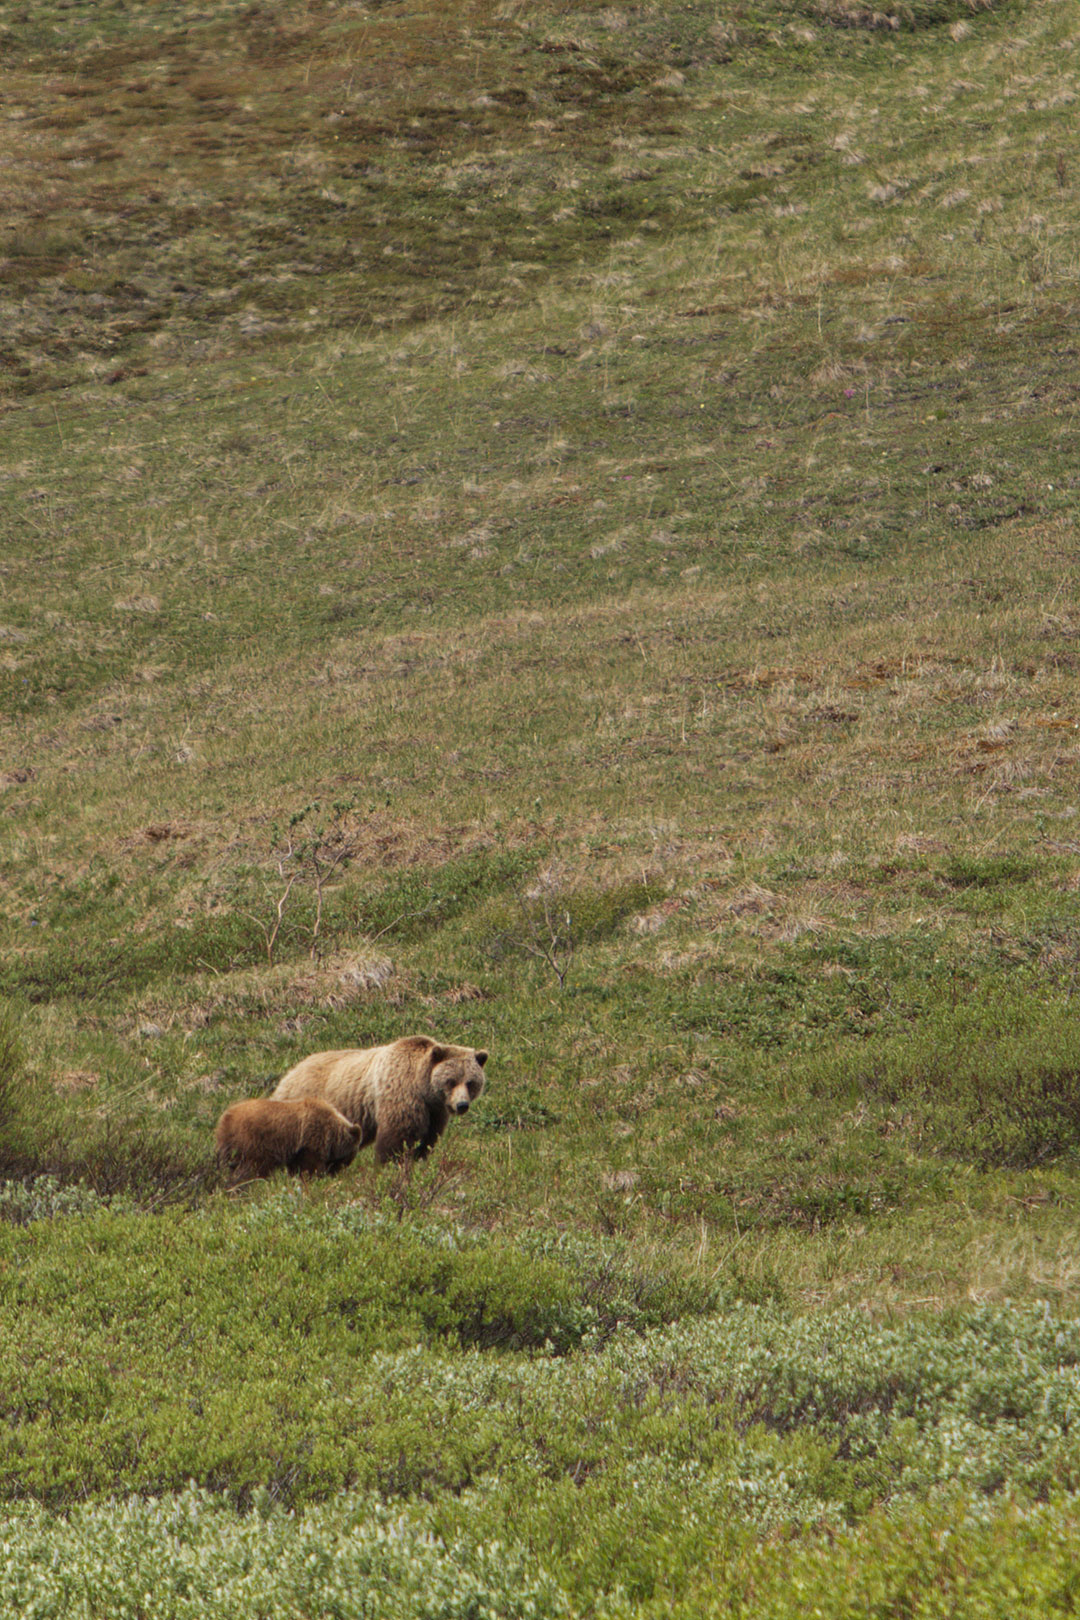 Seeing Denali Grizzly Bear on the Tundra Wilderness Tour